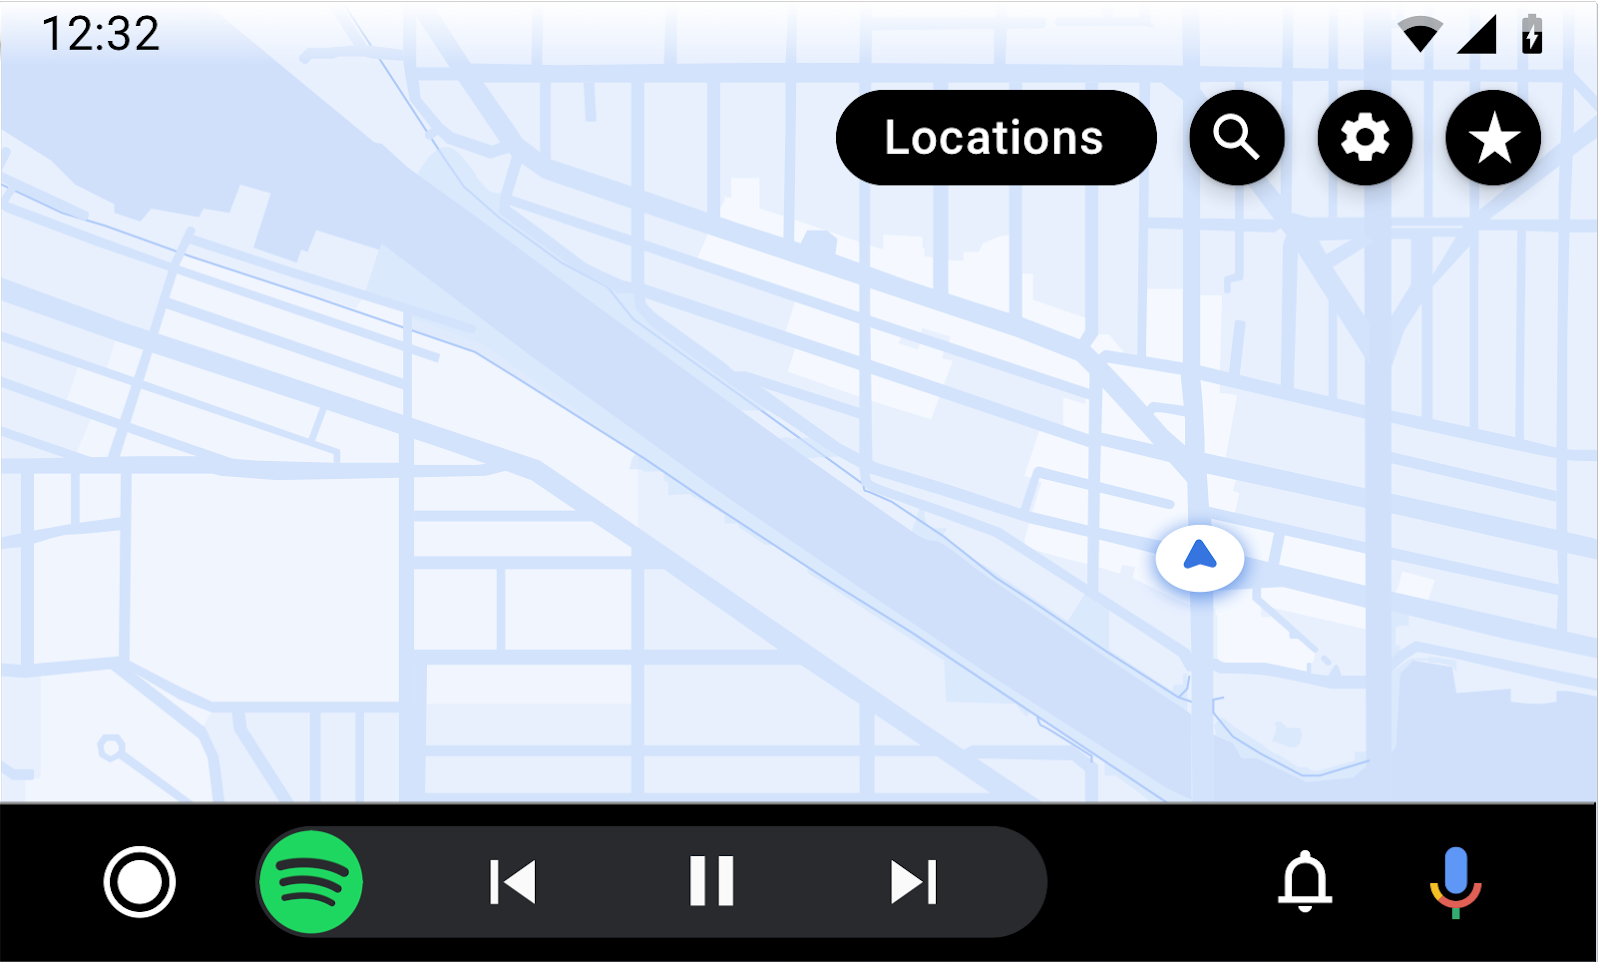 Android Auto Map template with 4 action strip buttons